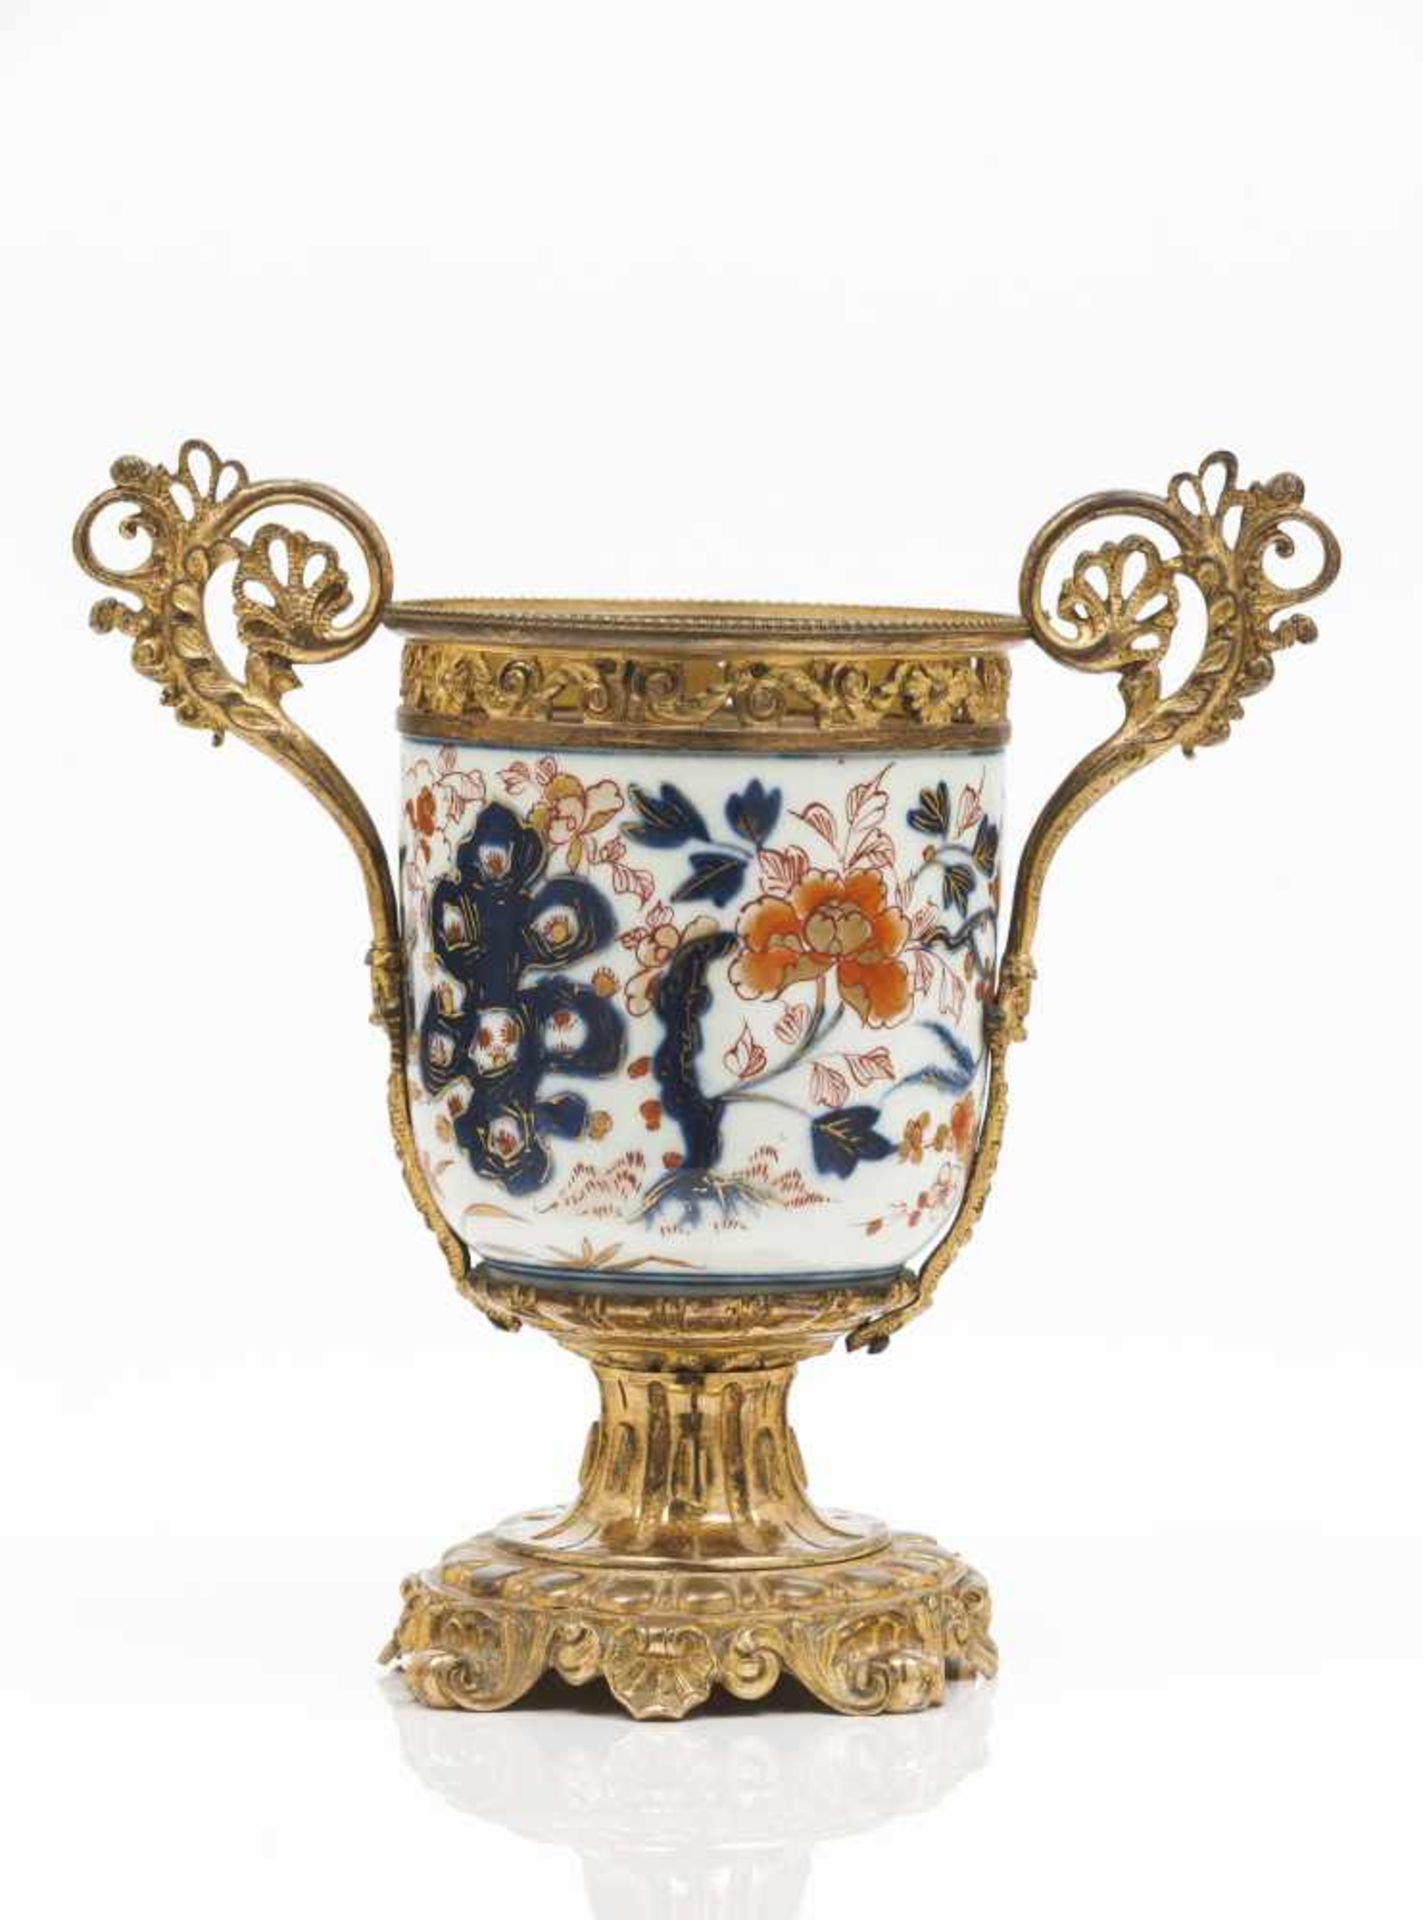 A Louis XV style urnJapanese porcelainPolychrome and gilt Imari decoration of floral and fo